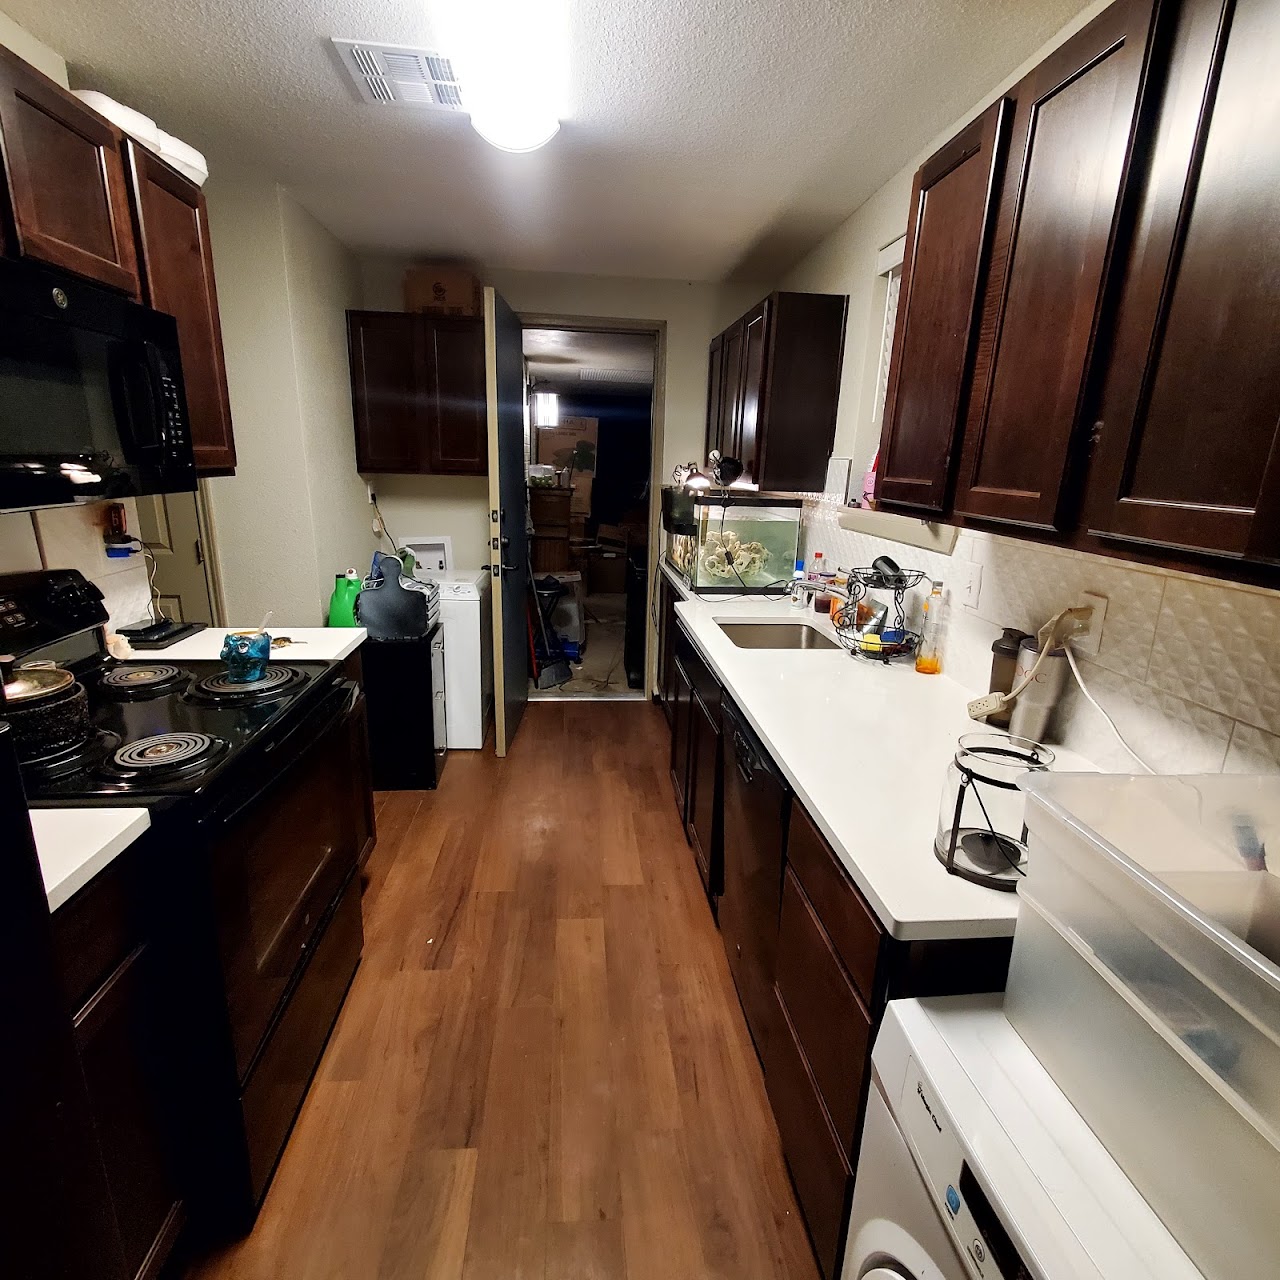 Photo of SOUTH TERRACE. Affordable housing located at 100 KENNEDY CIRCLE WACO, TX 76706